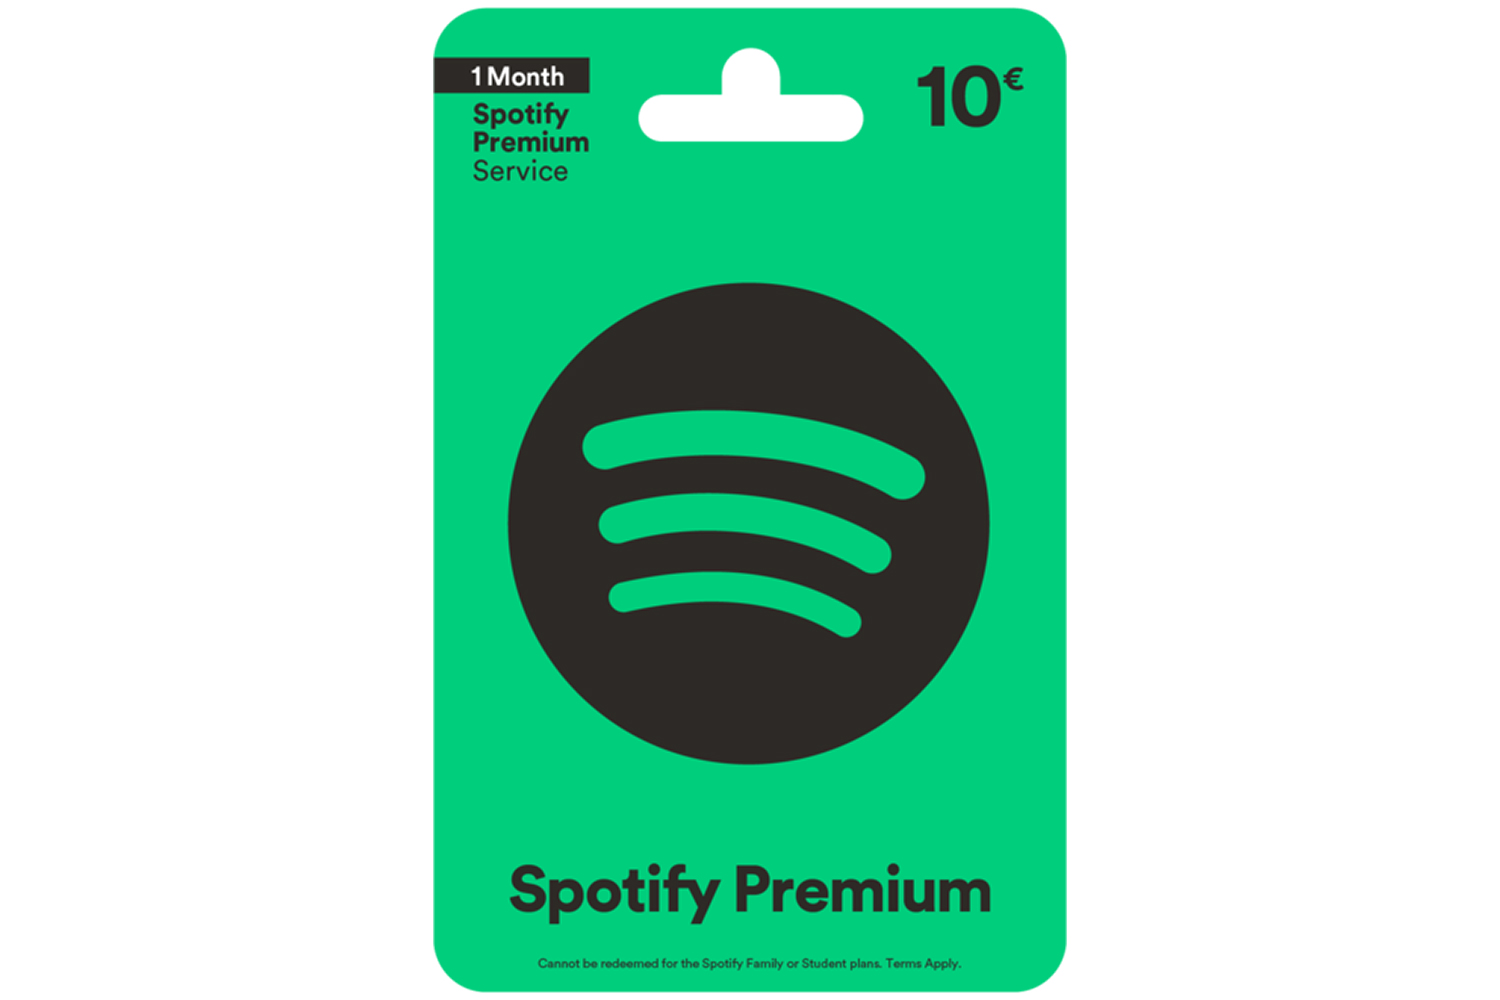 can you buy spotify premium with itunes gift card